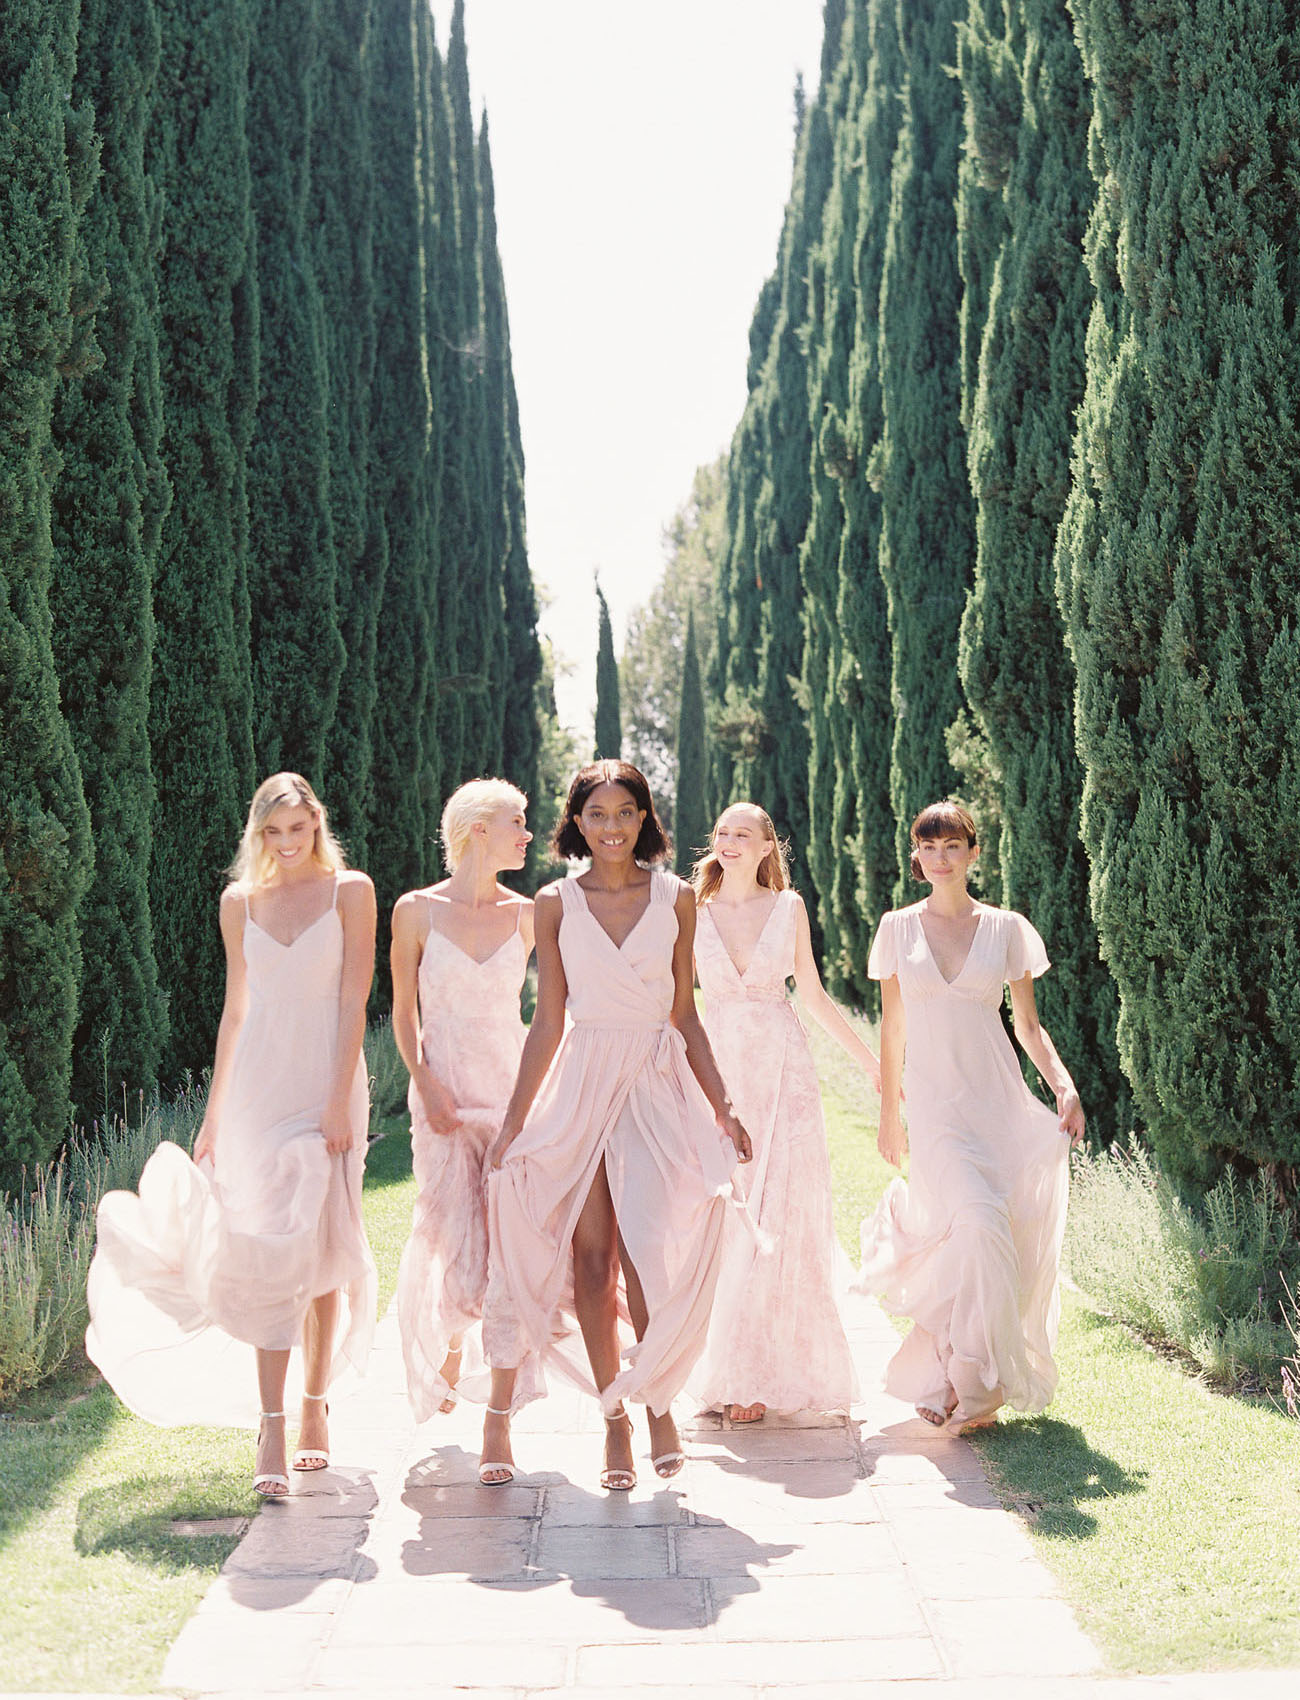 Joanna August’s New Additions for Bridesmaids + Brides That Won’t Break the Bank